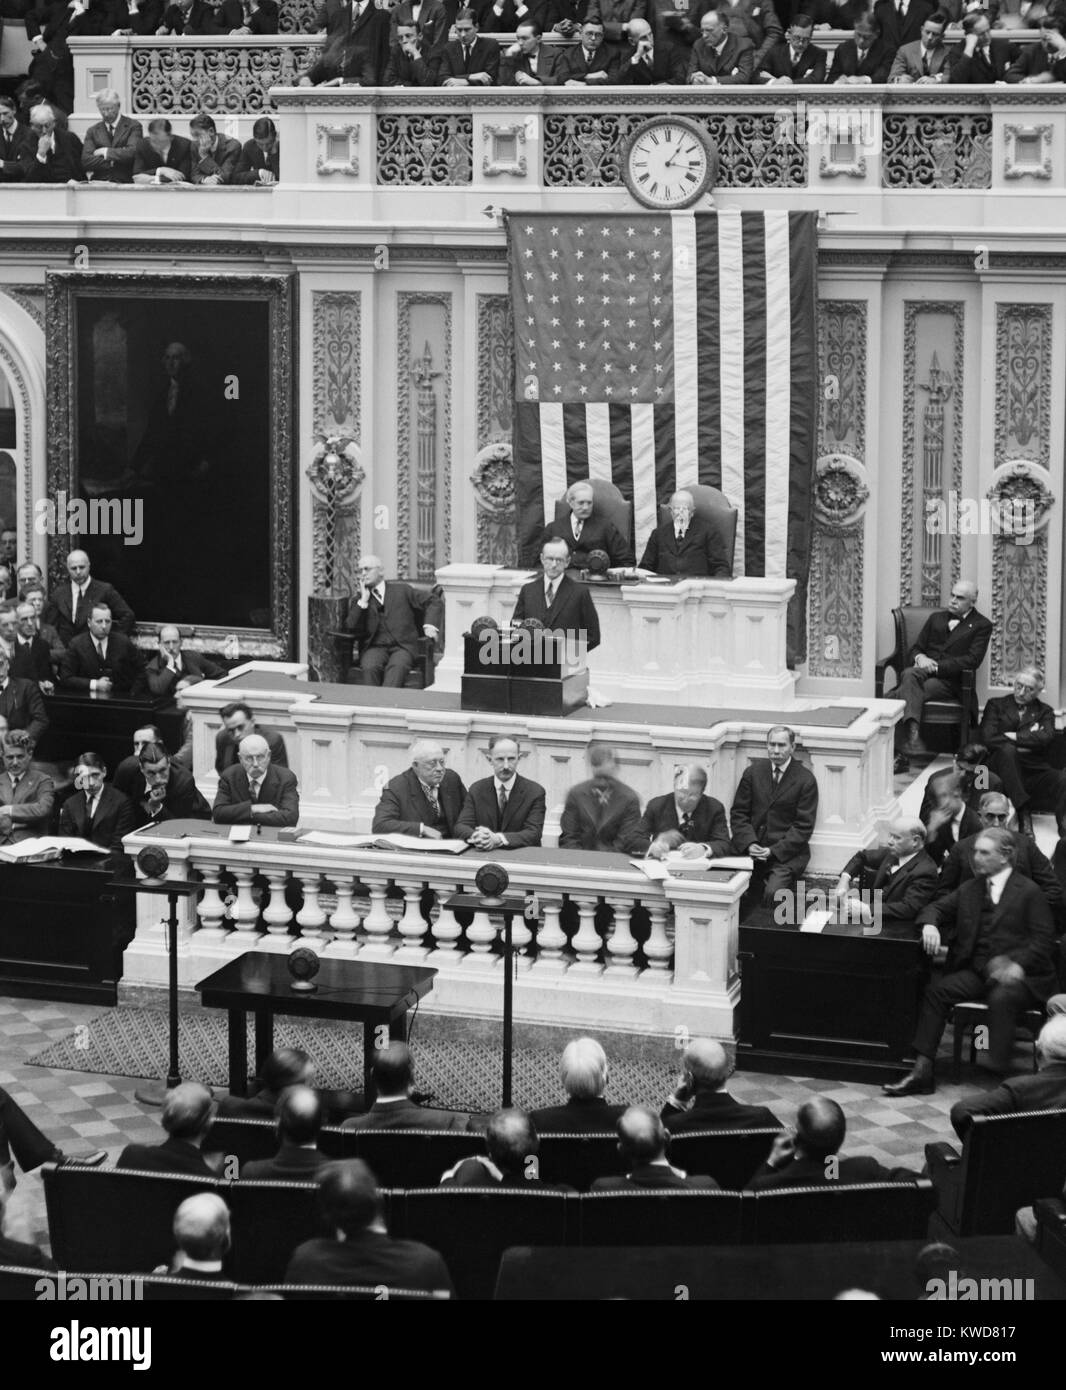 President Calvin Coolidge delivering his first message to Congress on Dec. 6, 1923. He assumed the Presidency following the death of Warren Harding on August 2, 1923. (BSLOC 2015 16 251) Stock Photo